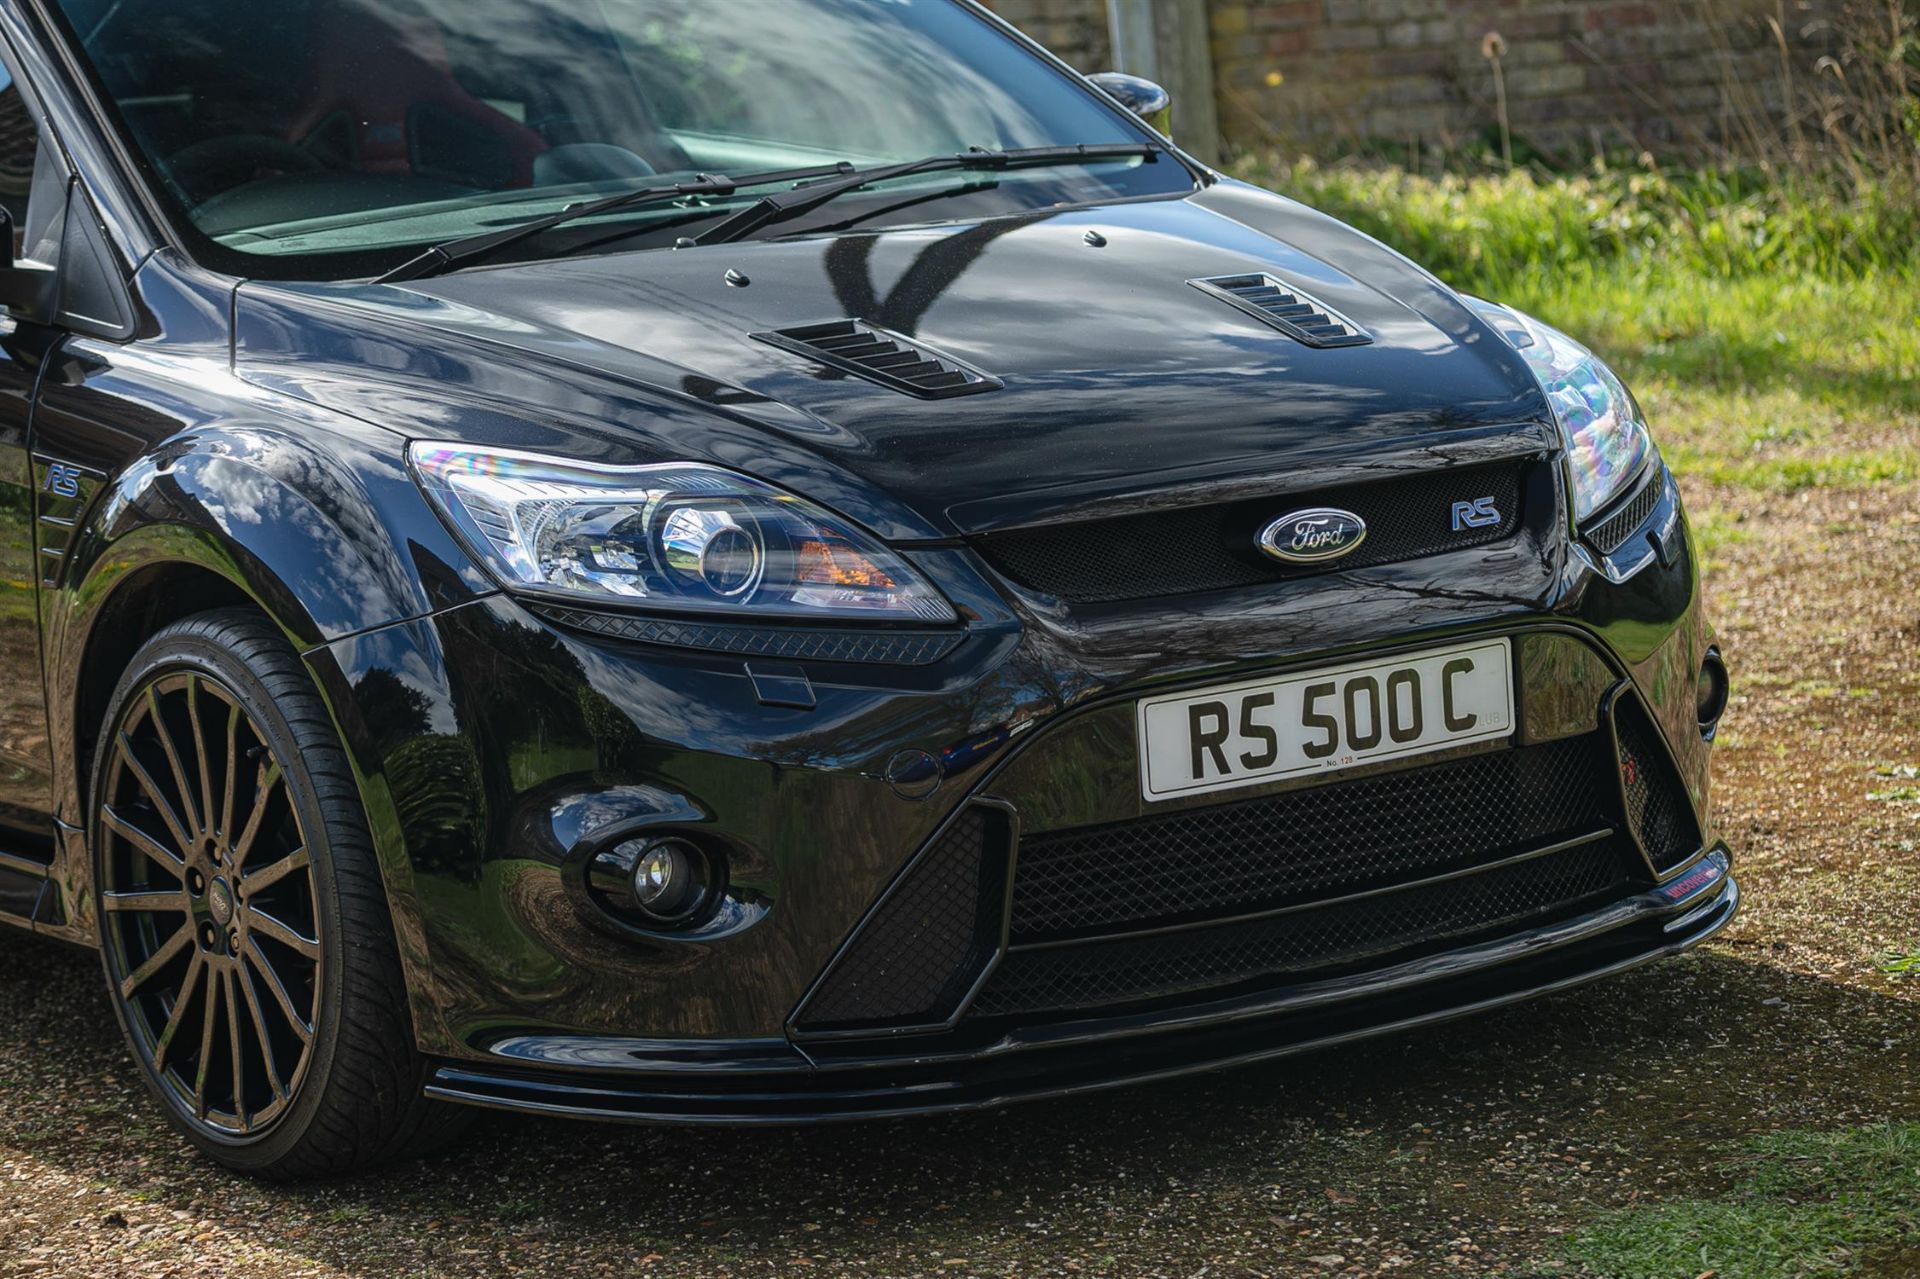 2010 Ford Focus RS500 #128 - 7,700 Miles - Image 8 of 10